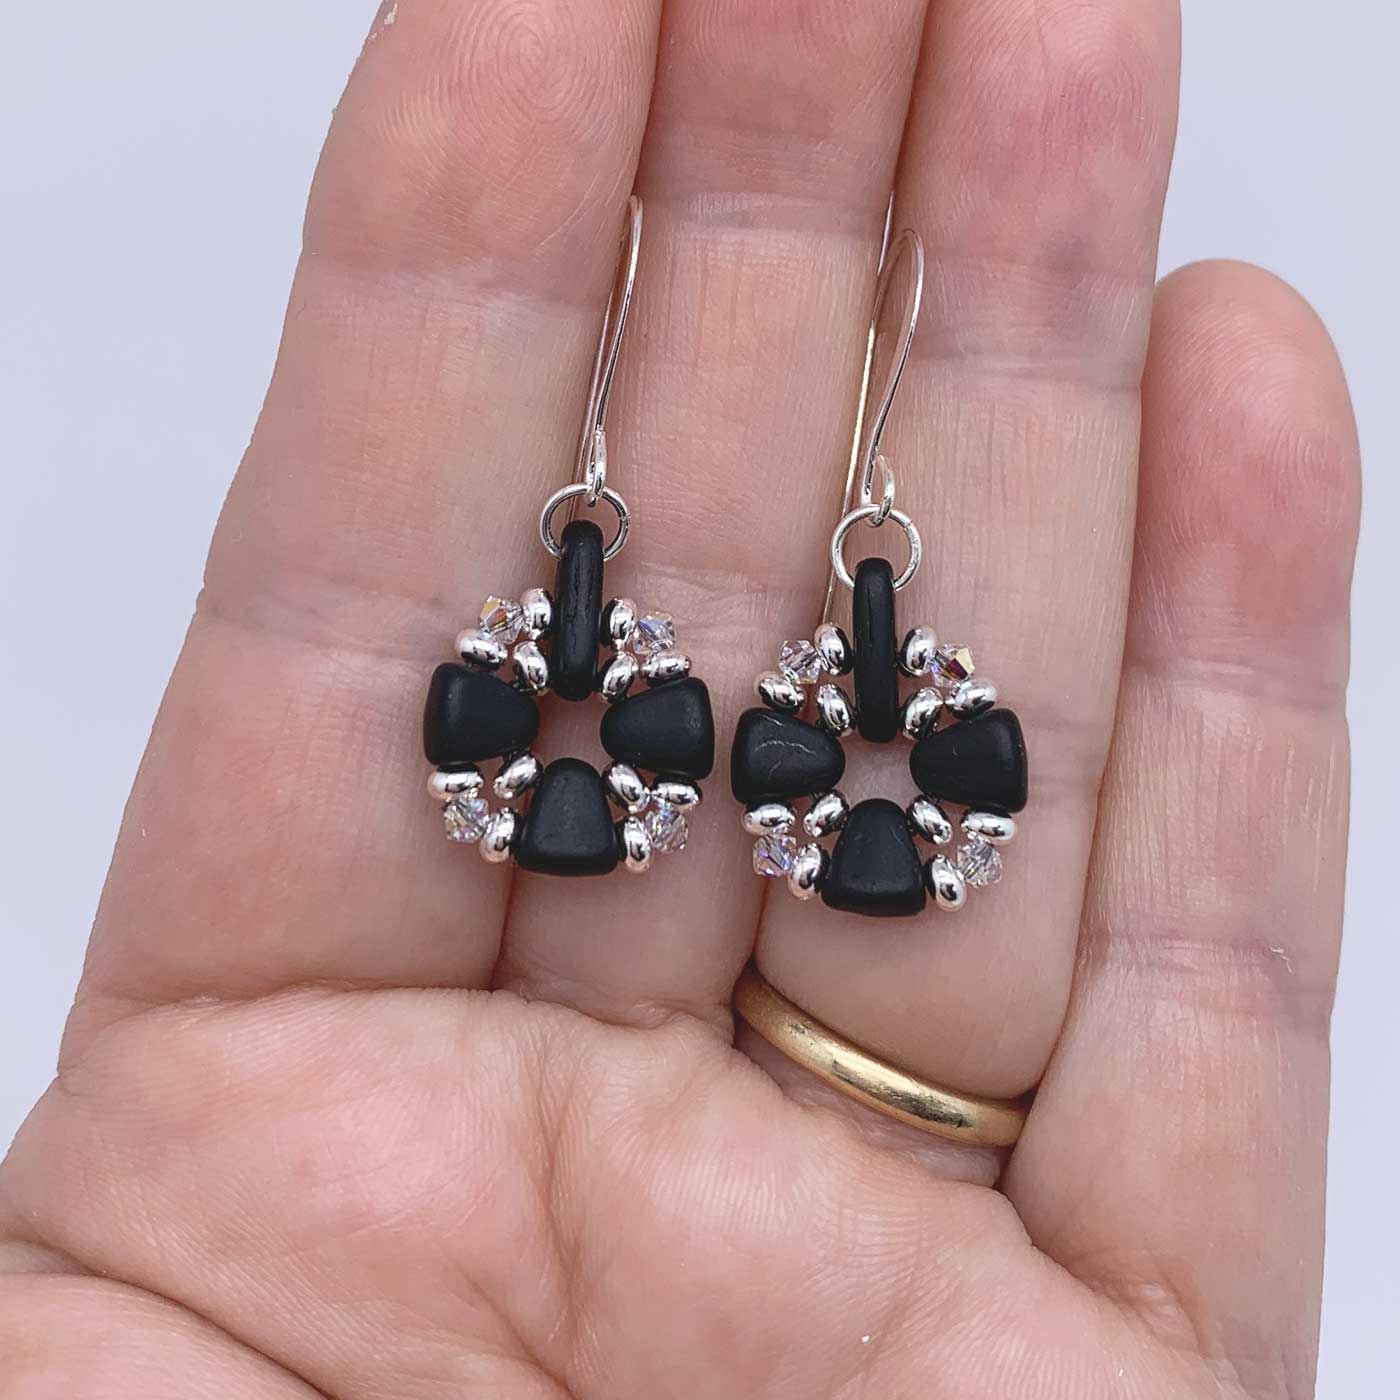 nz black and silver earrings